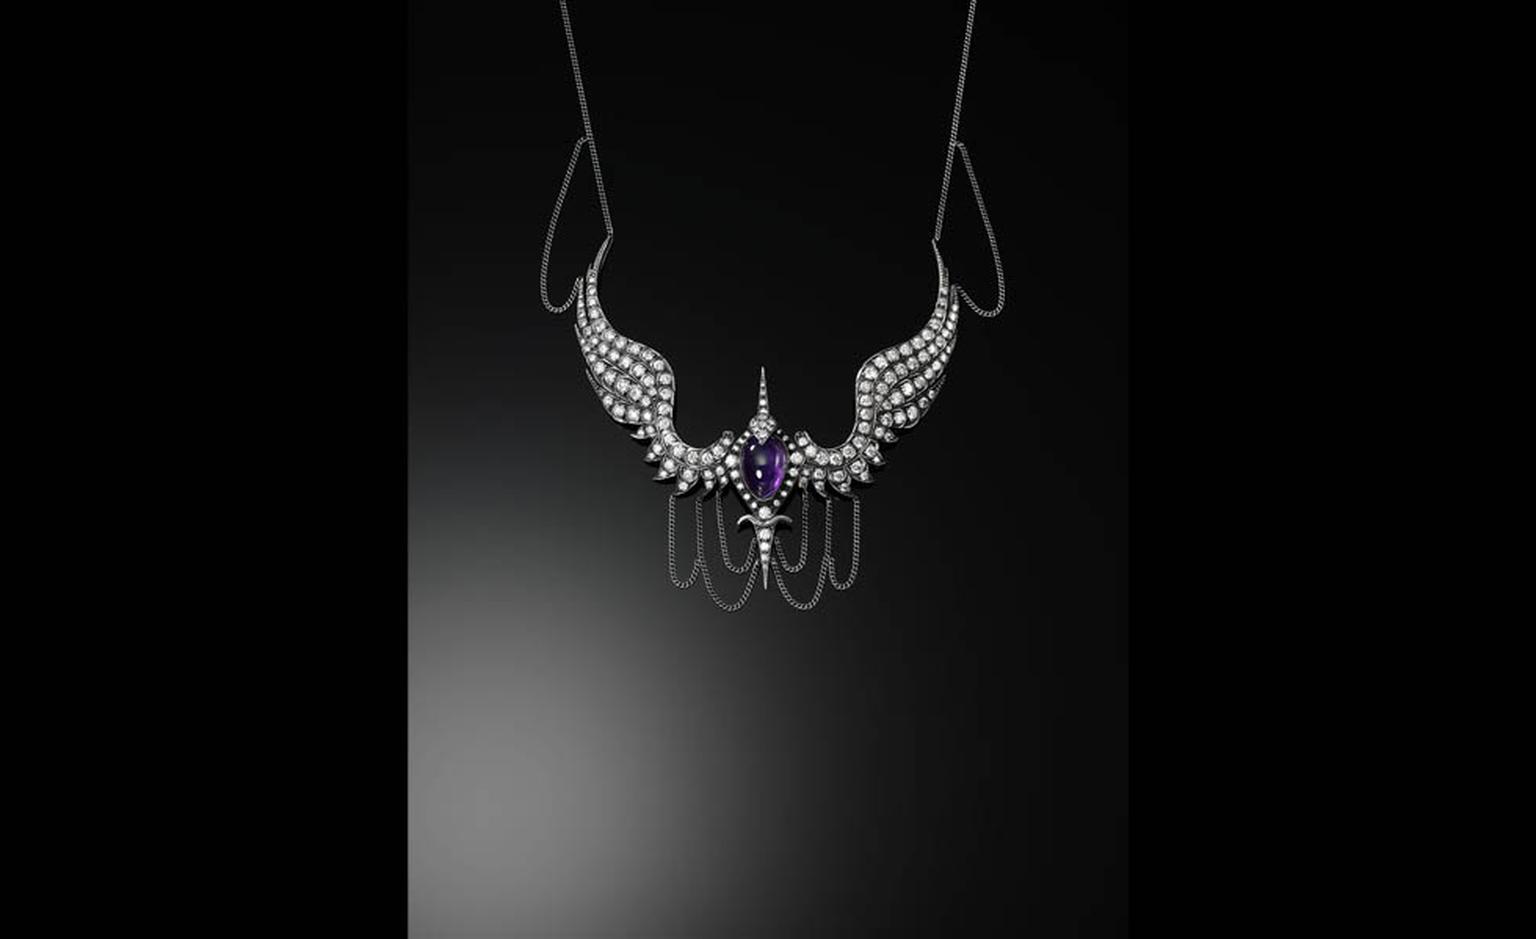 Jessica McCormack "Take me under your wings' necklace with central cabochon cut amethyst surrounded by diamonds in yellow gold and oxidised silver, £59,840